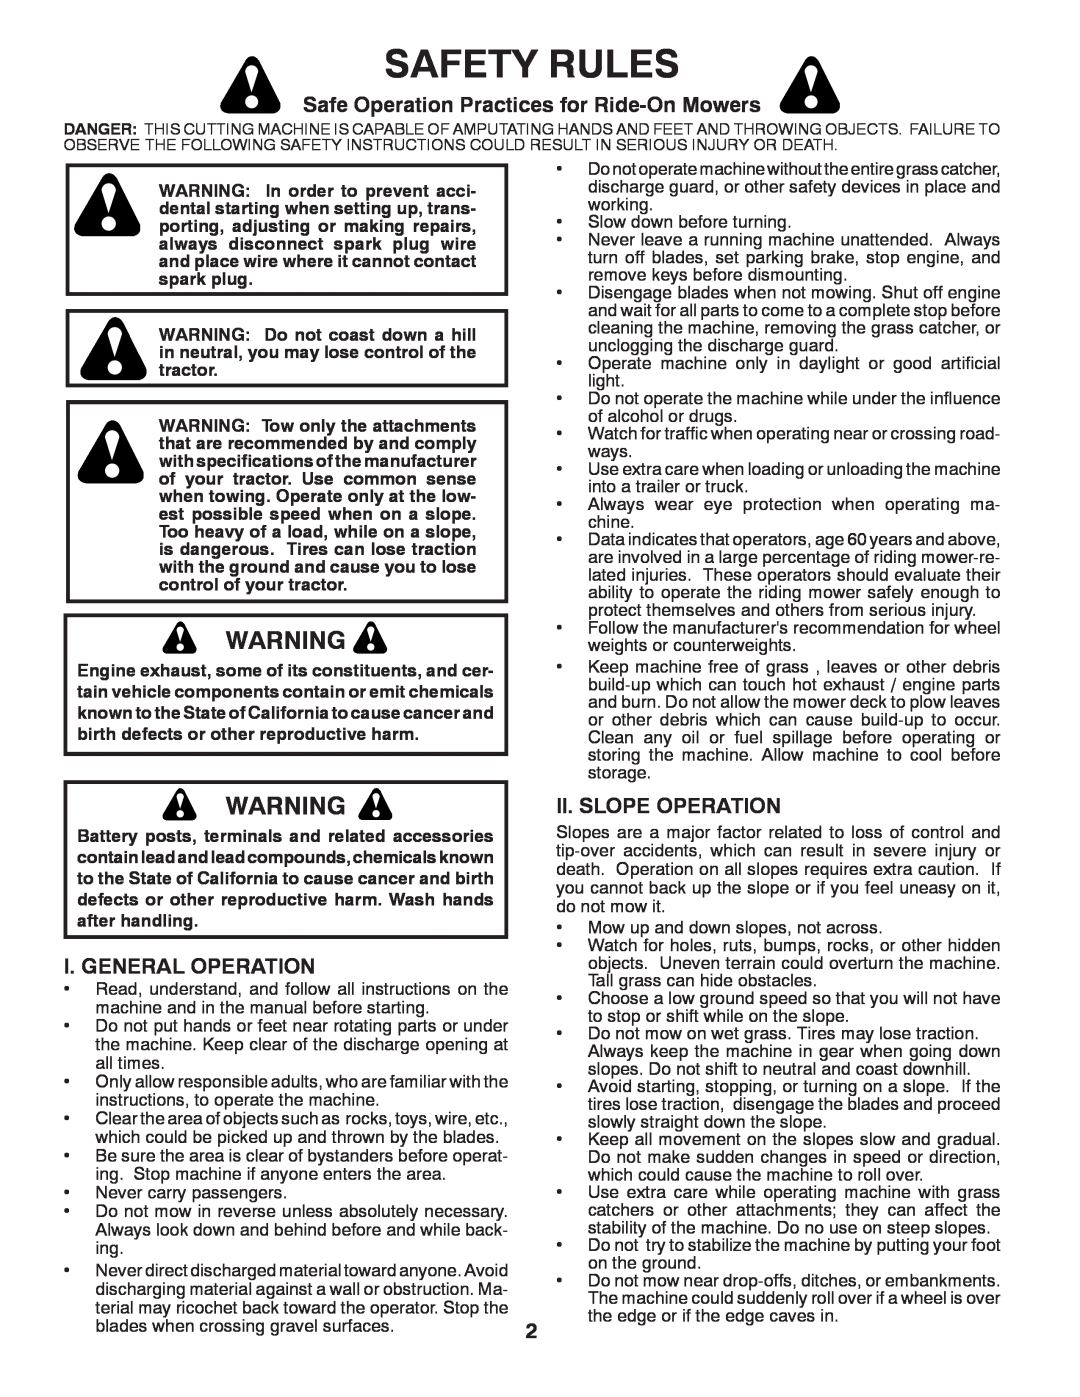 Murray 96012007200 Safety Rules, Safe Operation Practices for Ride-OnMowers, I. General Operation, Ii. Slope Operation 